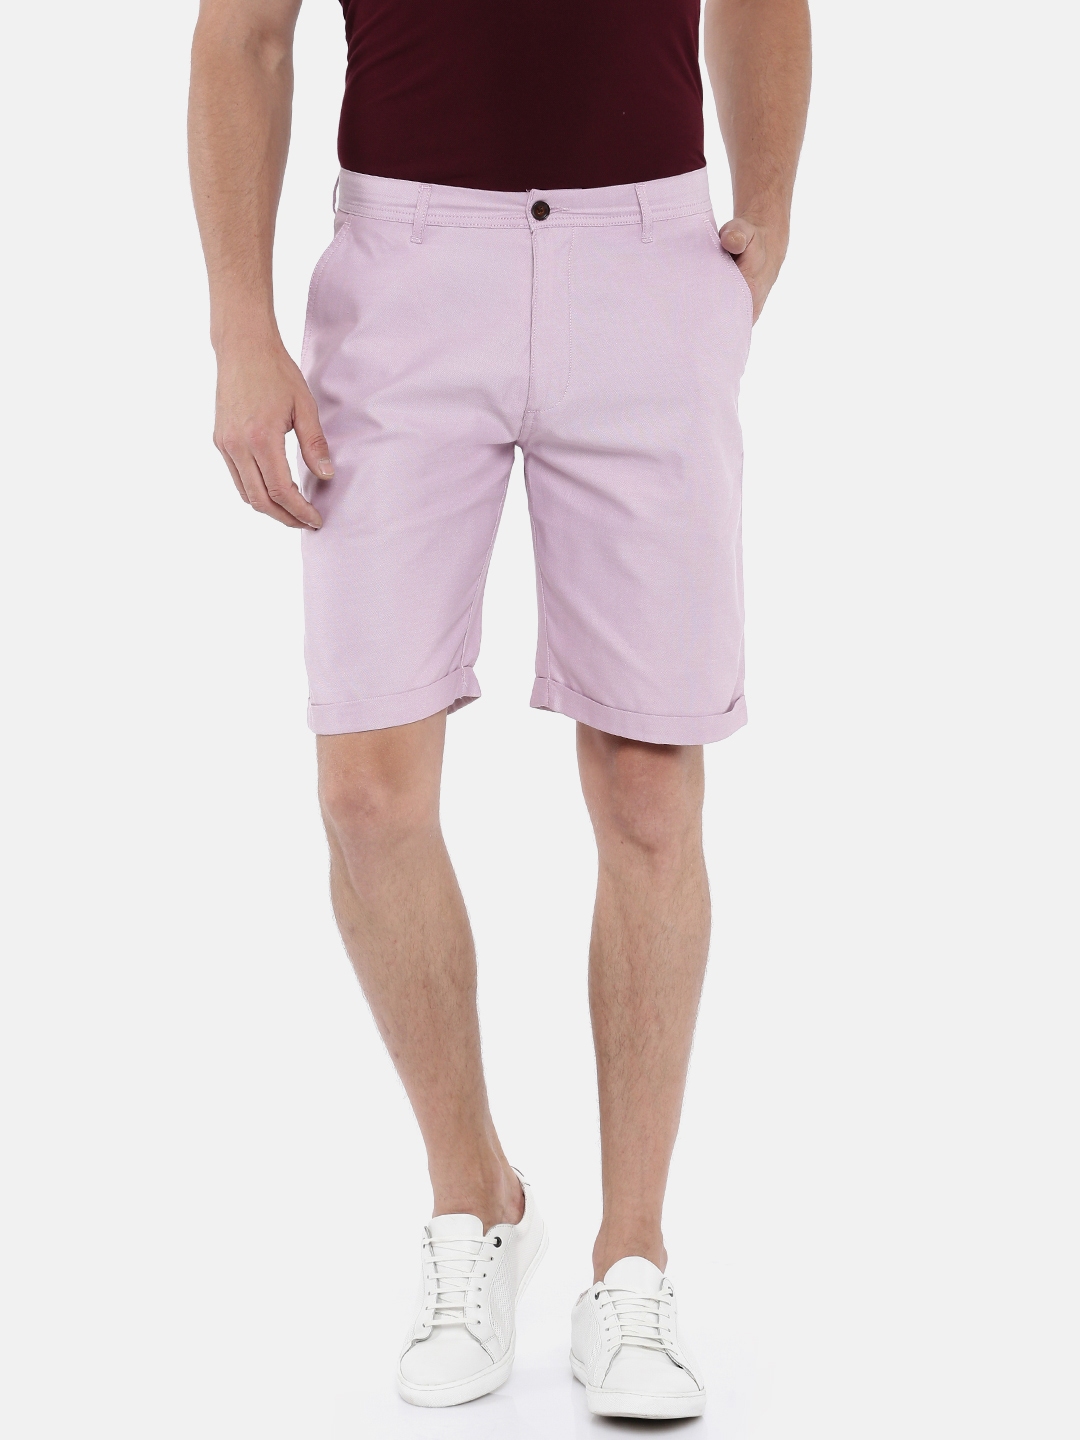 What Goes with Pink Shorts?